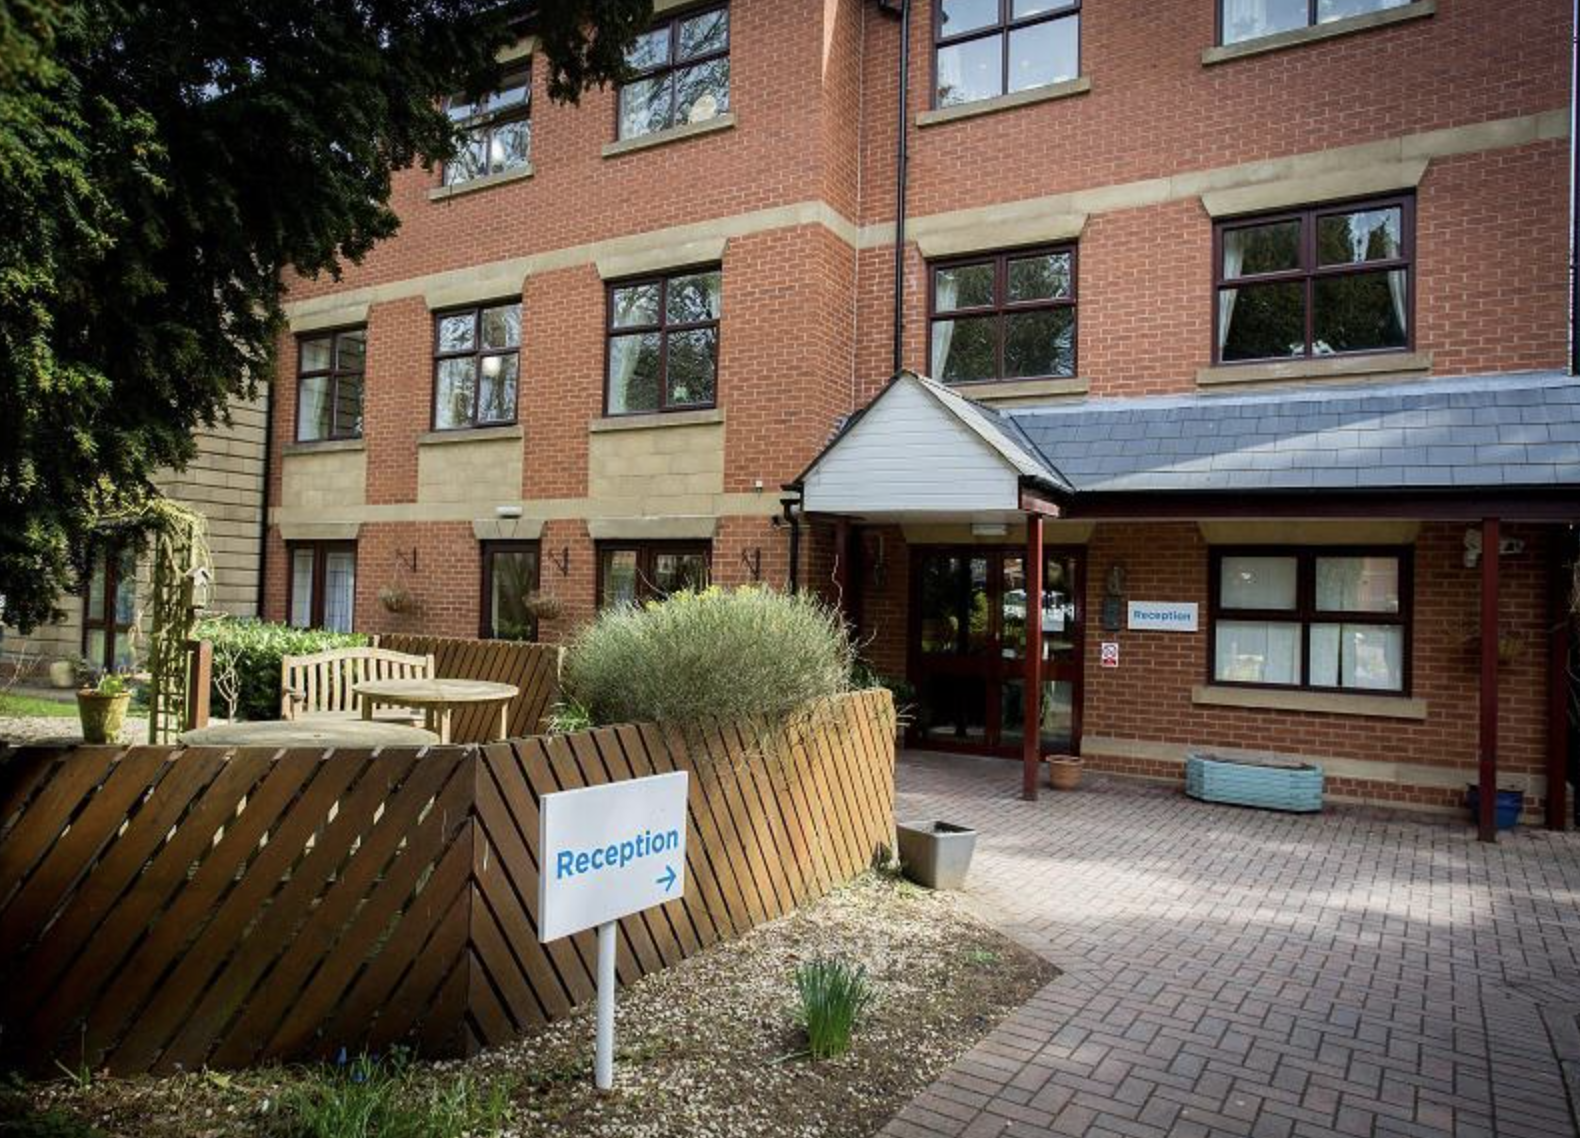 Exterior of Ardenlea Grove care home in Solihull, West Midlands